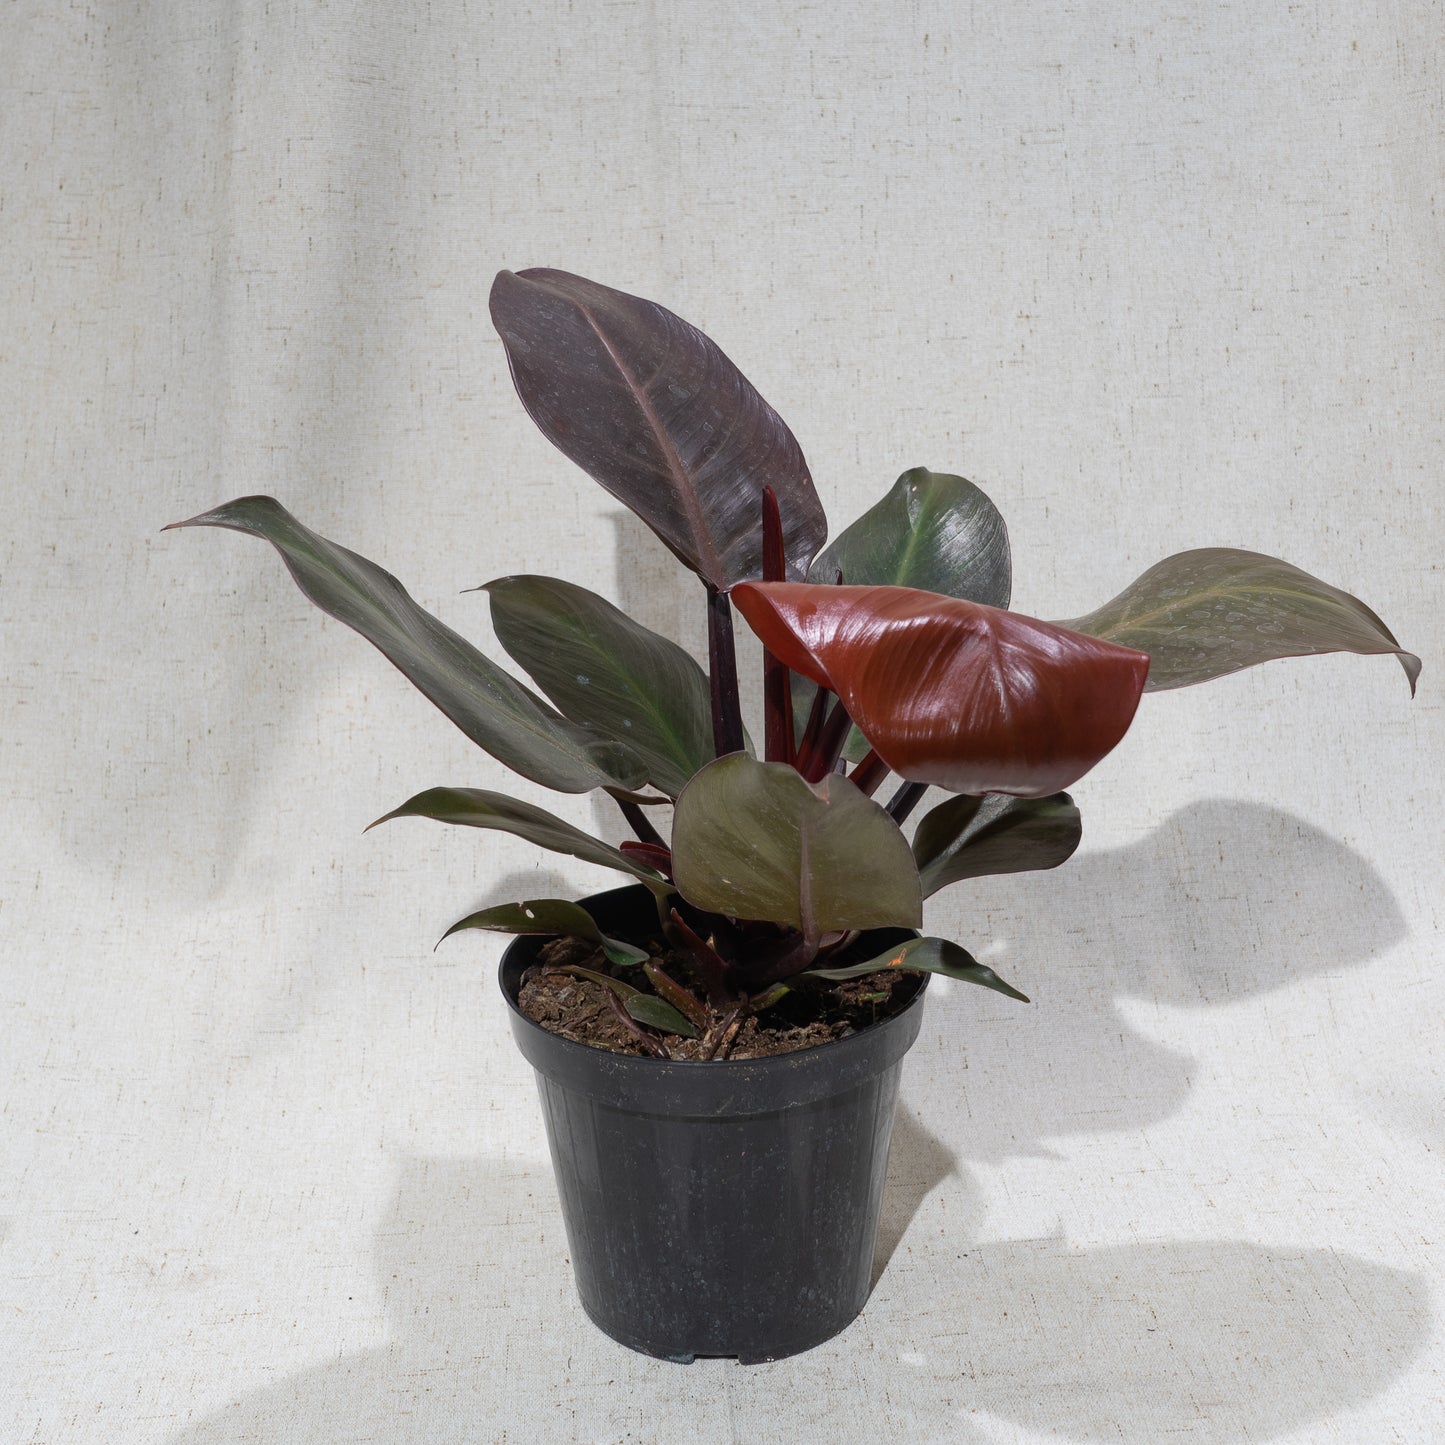 Red Imperial Philo (Philodendron) in a 6 inch pot. Indoor plant for sale by Promise Supply for delivery and pickup in Toronto